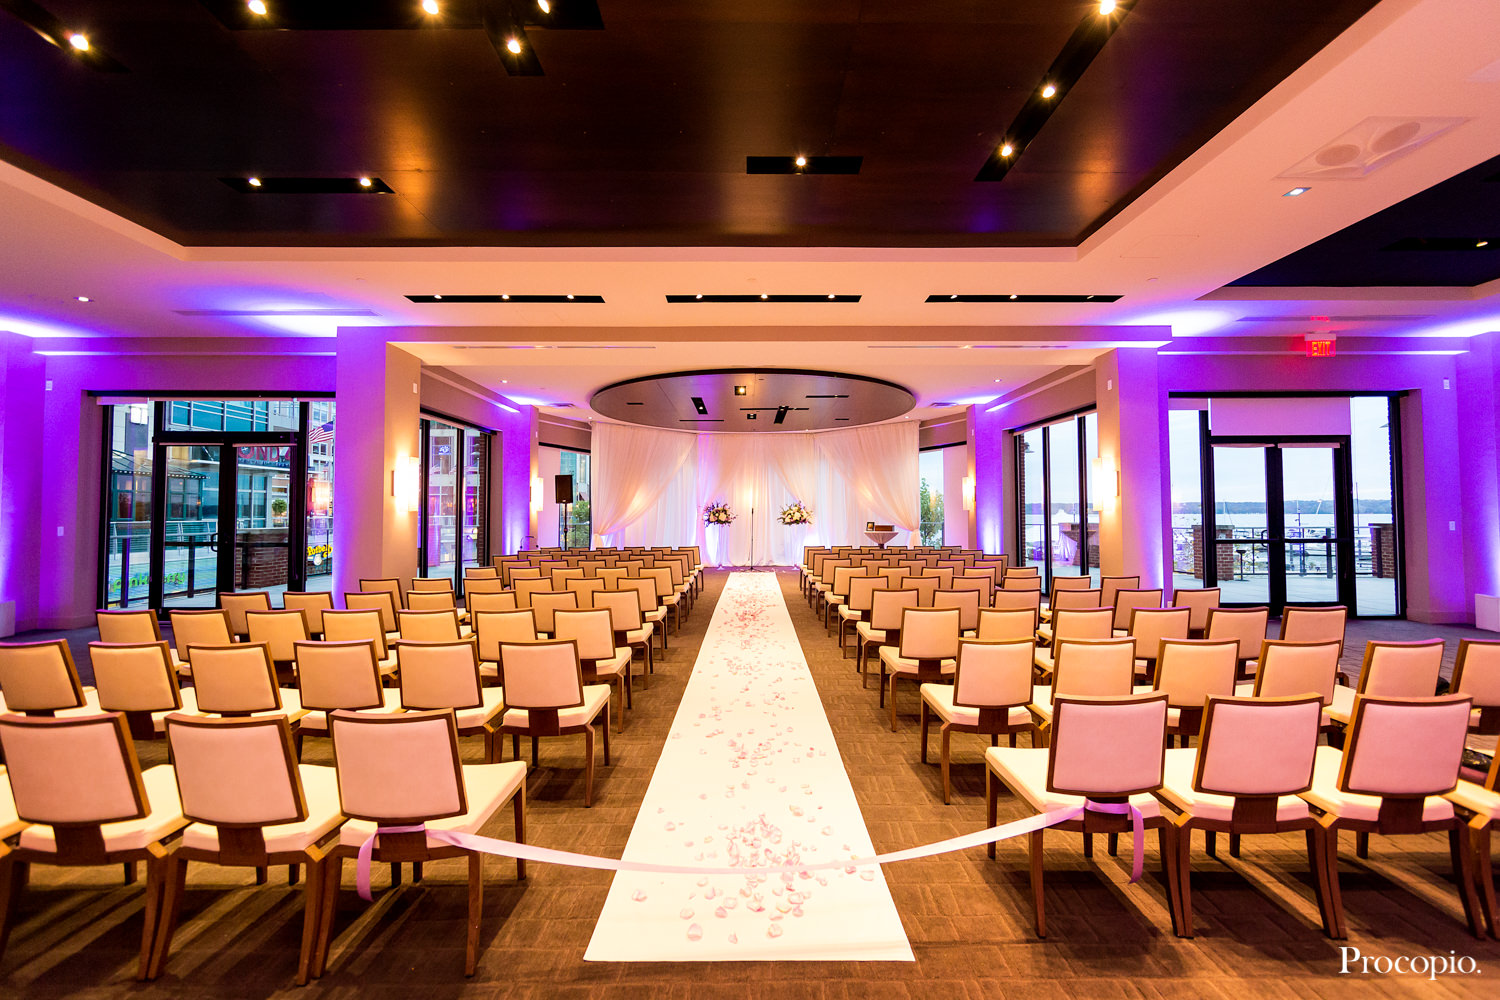 Washington National Harbor, The Sunset Room, Washington DC, wedding colors are purple, pink, and white, rain on your wedding day, indoor ceremony, indoor reception, fall wedding, Procopio Photography, best top Washington DC photographer, best top Maryland photographer, best top Virginia photographer, best top DMV photographer, best top wedding photographer, best top commercial photographer, best top portrait photographer, best top boudoir photographer, modern fine art portraits, dramatic, unique, different, bold, editorial, photojournalism, award winning photographer, published photographer, memorable images, be different, stand out